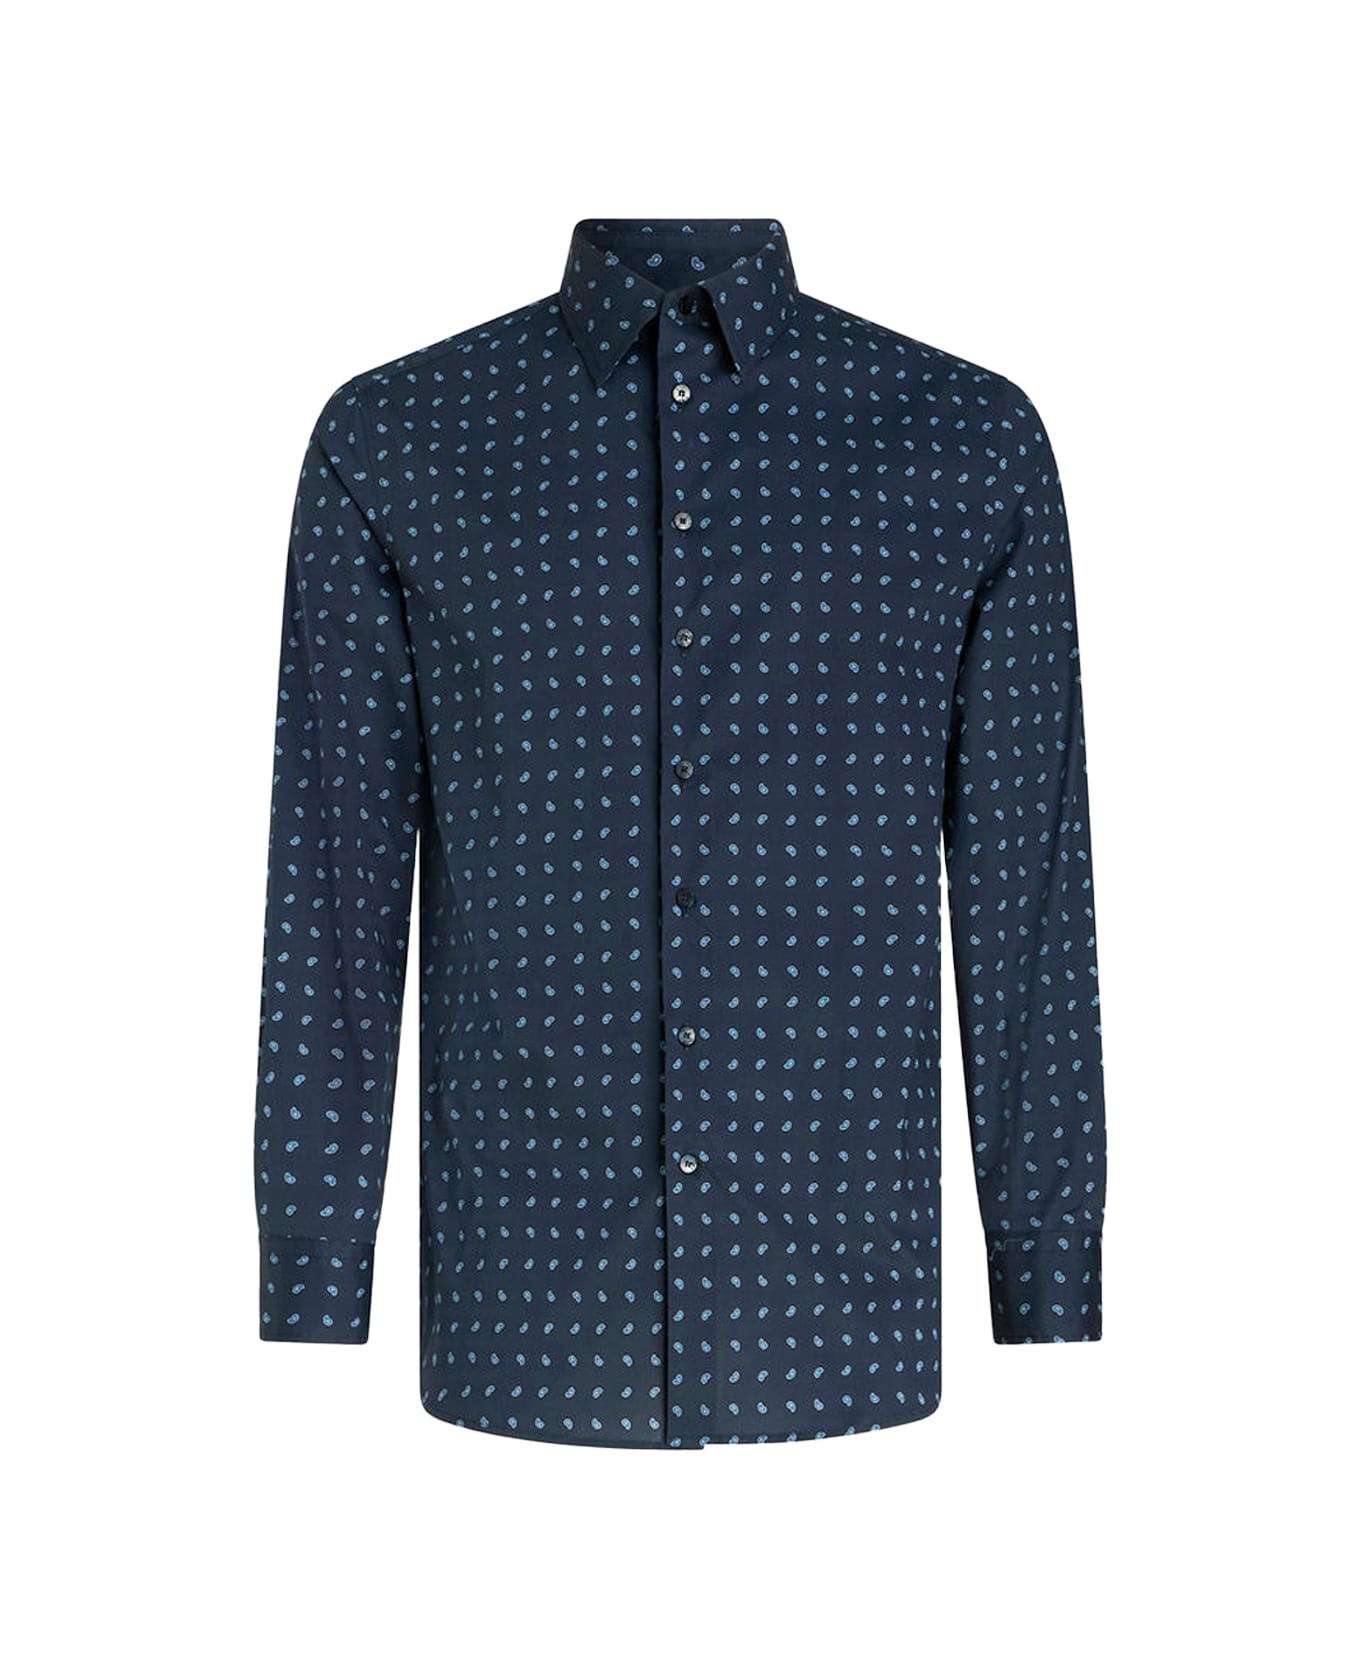 Etro Navy Blue Shirt With Micro Paisley Patterns